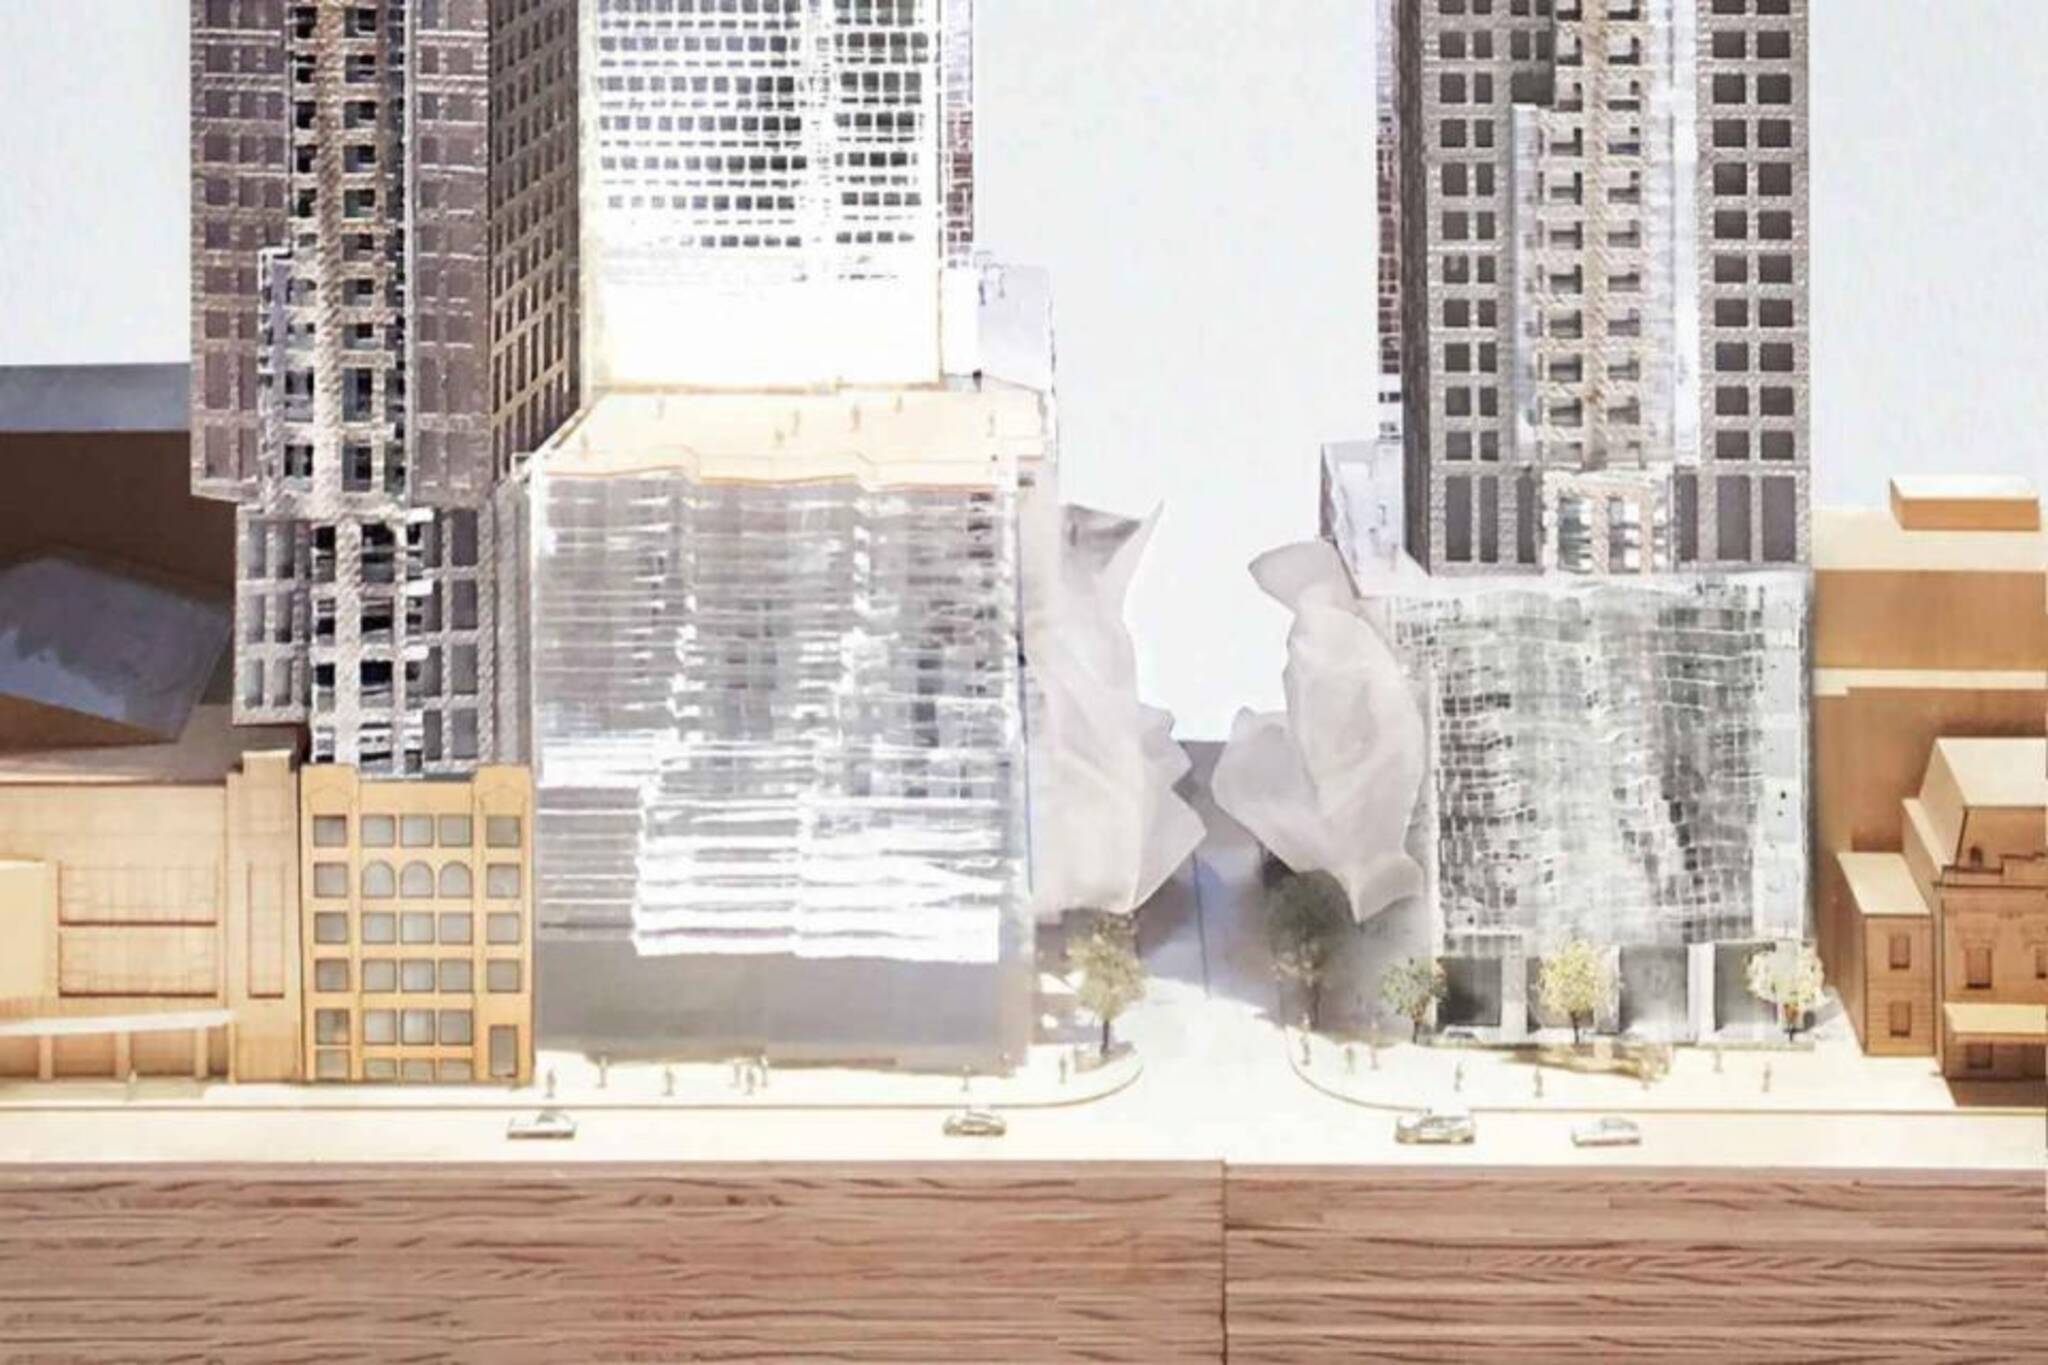 Frank Gehry returns to Canada to put his mark on the Toronto skyline